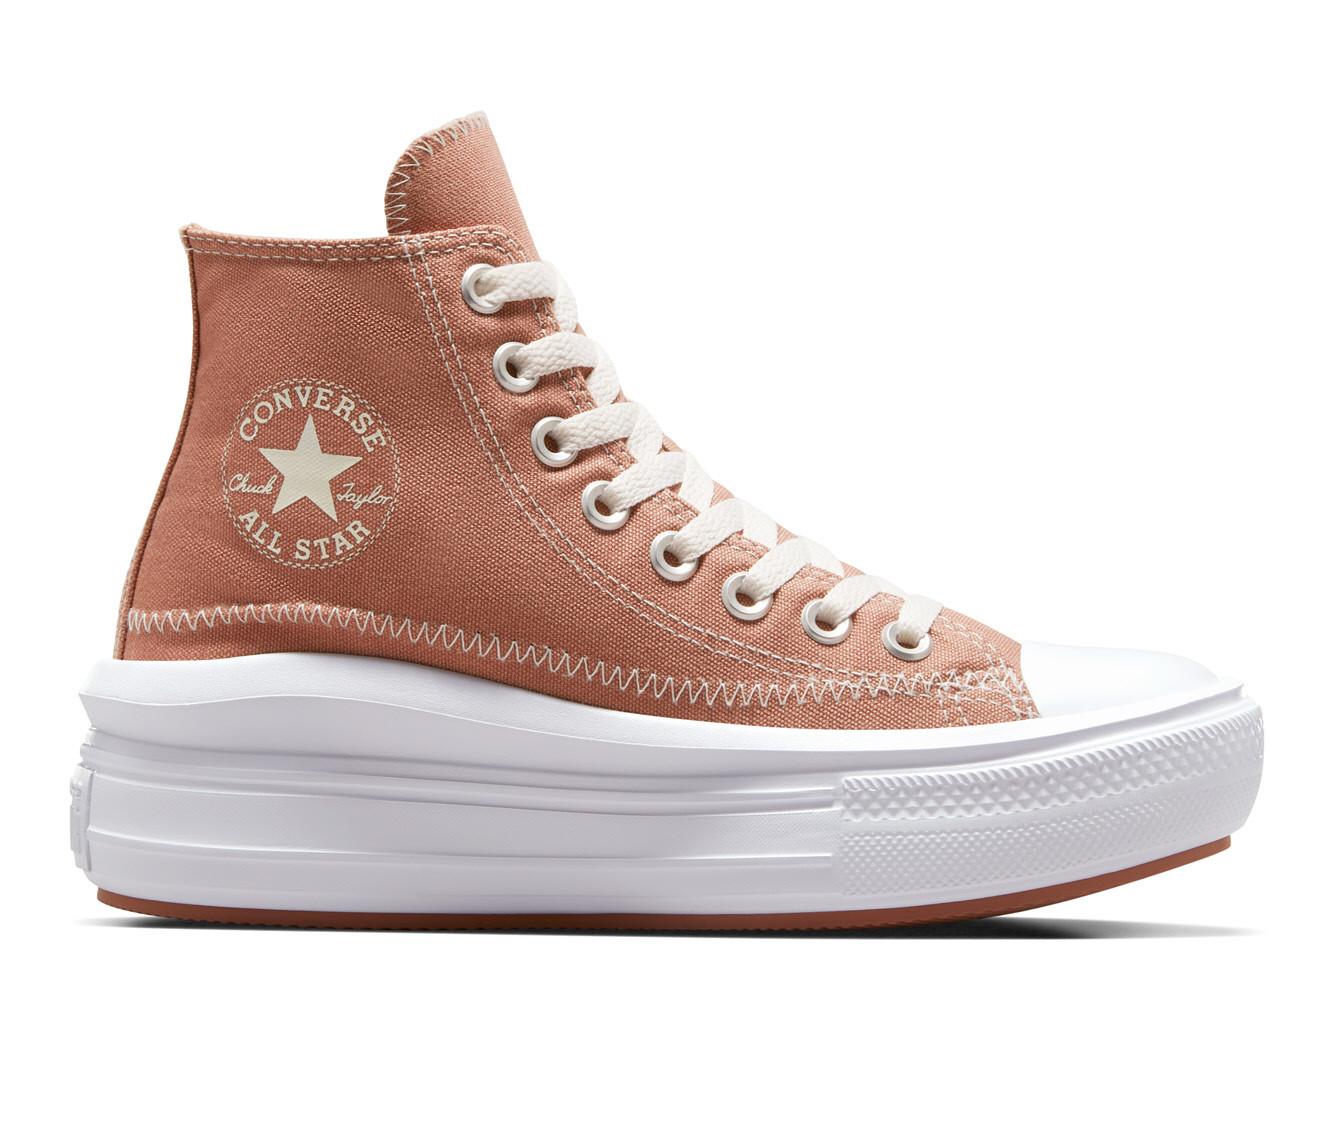 Converse Chuck Taylor All Star Lift platform sneakers in orange